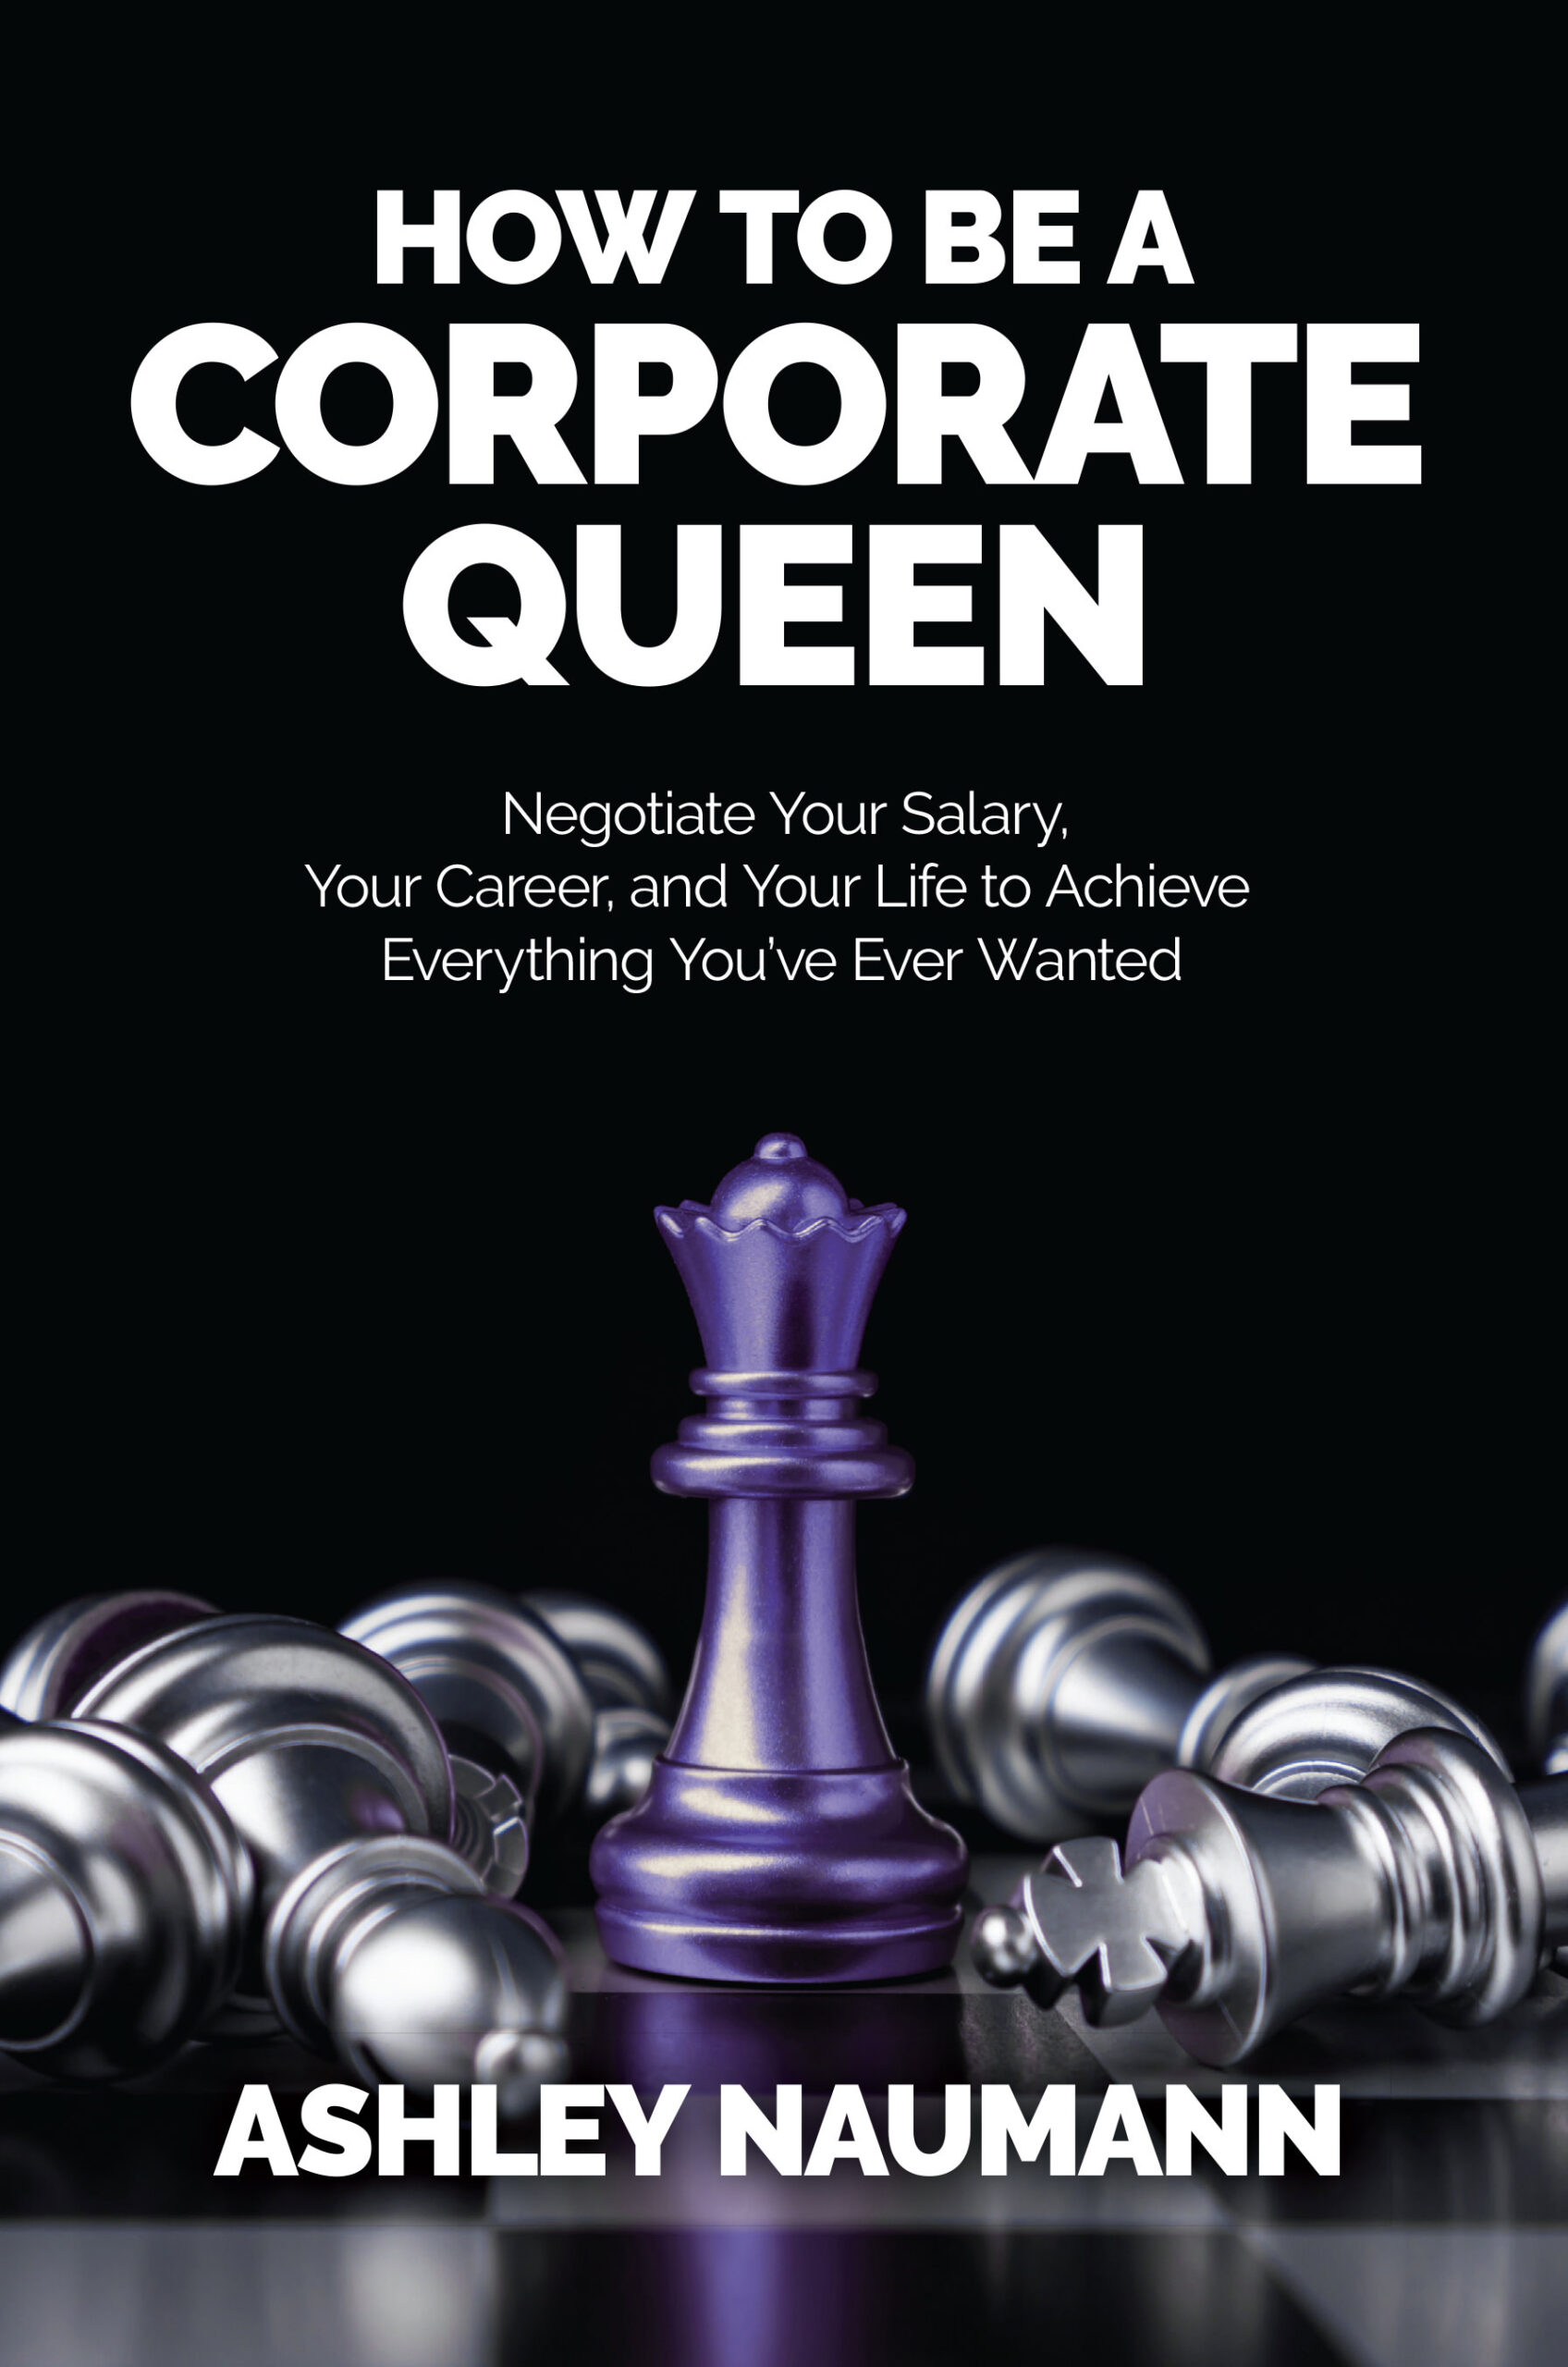 FREE: How to be a Corporate Queen by Ashley Naumann